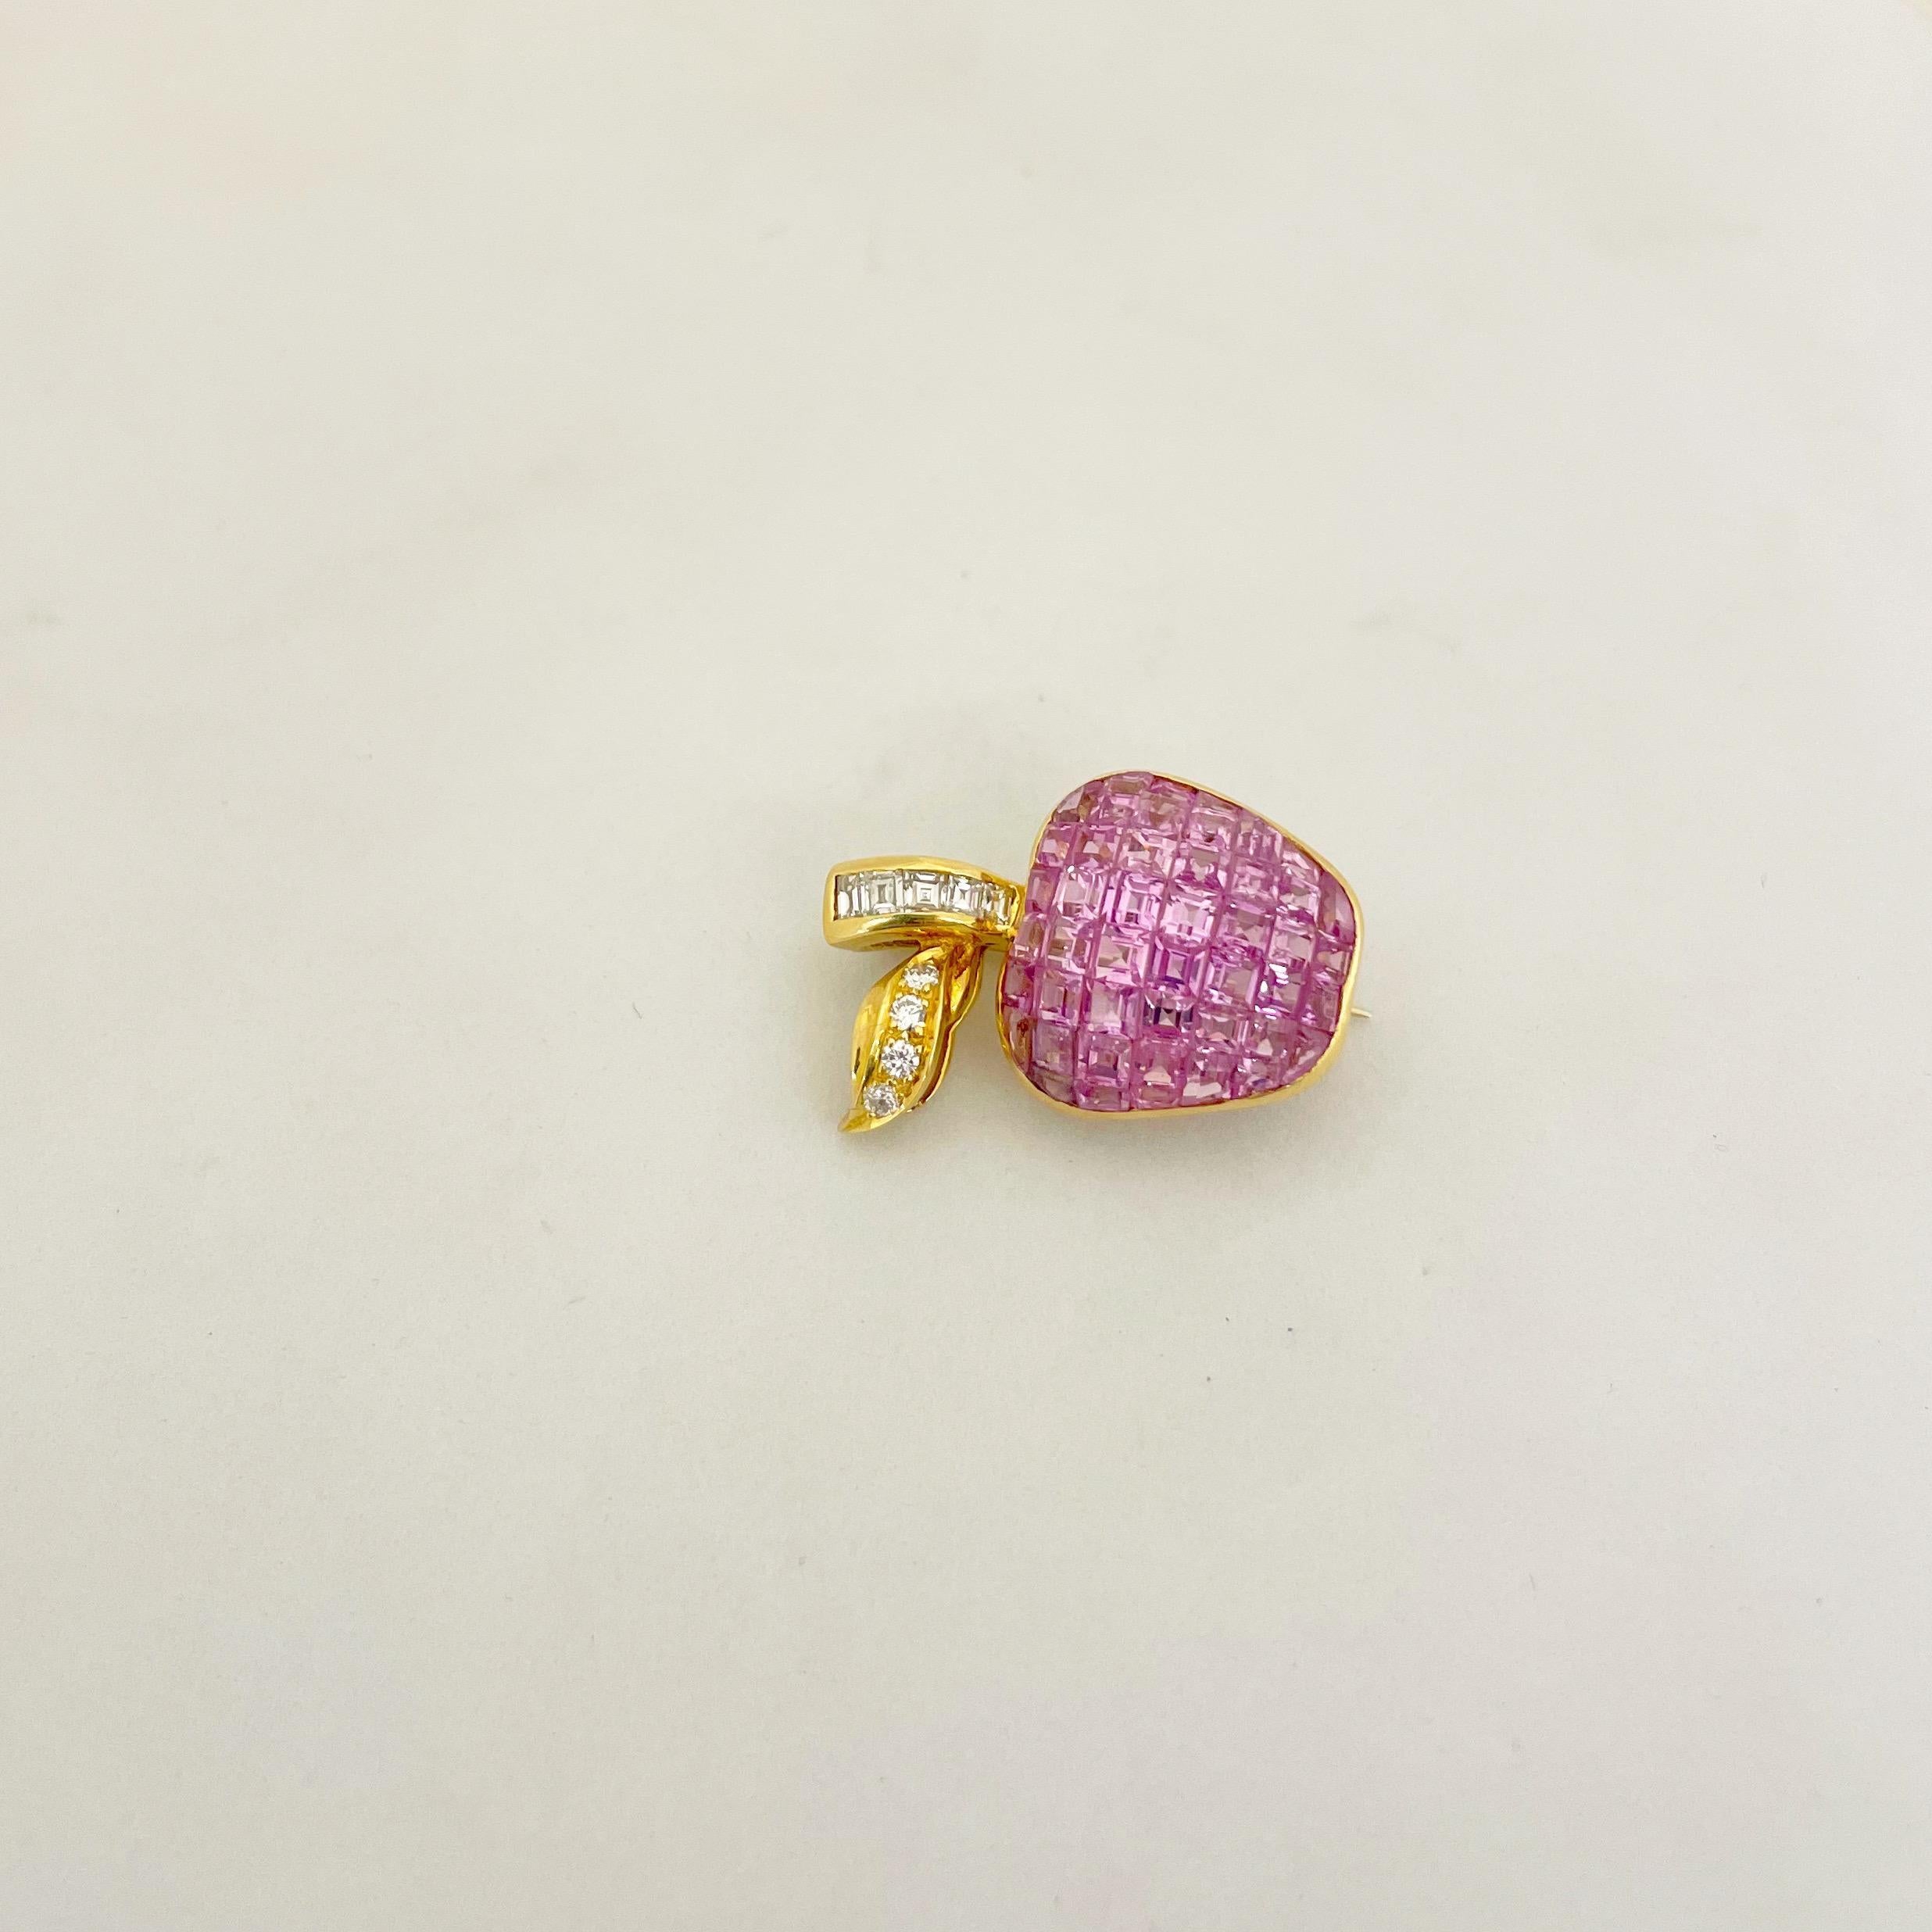 This lovely Cellini 18 karat yellow gold apple brooch has been invisibly set with vibrant square cut pink sapphires. The stem is set with square diamonds and the leaf with round brilliant diamonds. The apple measures 1